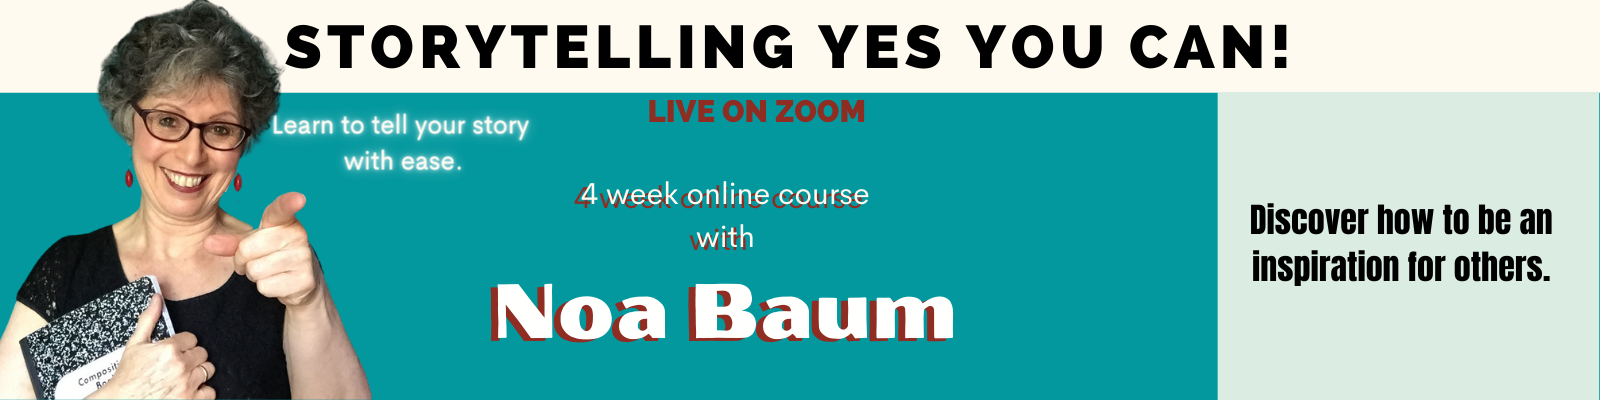 Storytelling Yes You Can! Online Course with Noa Baum